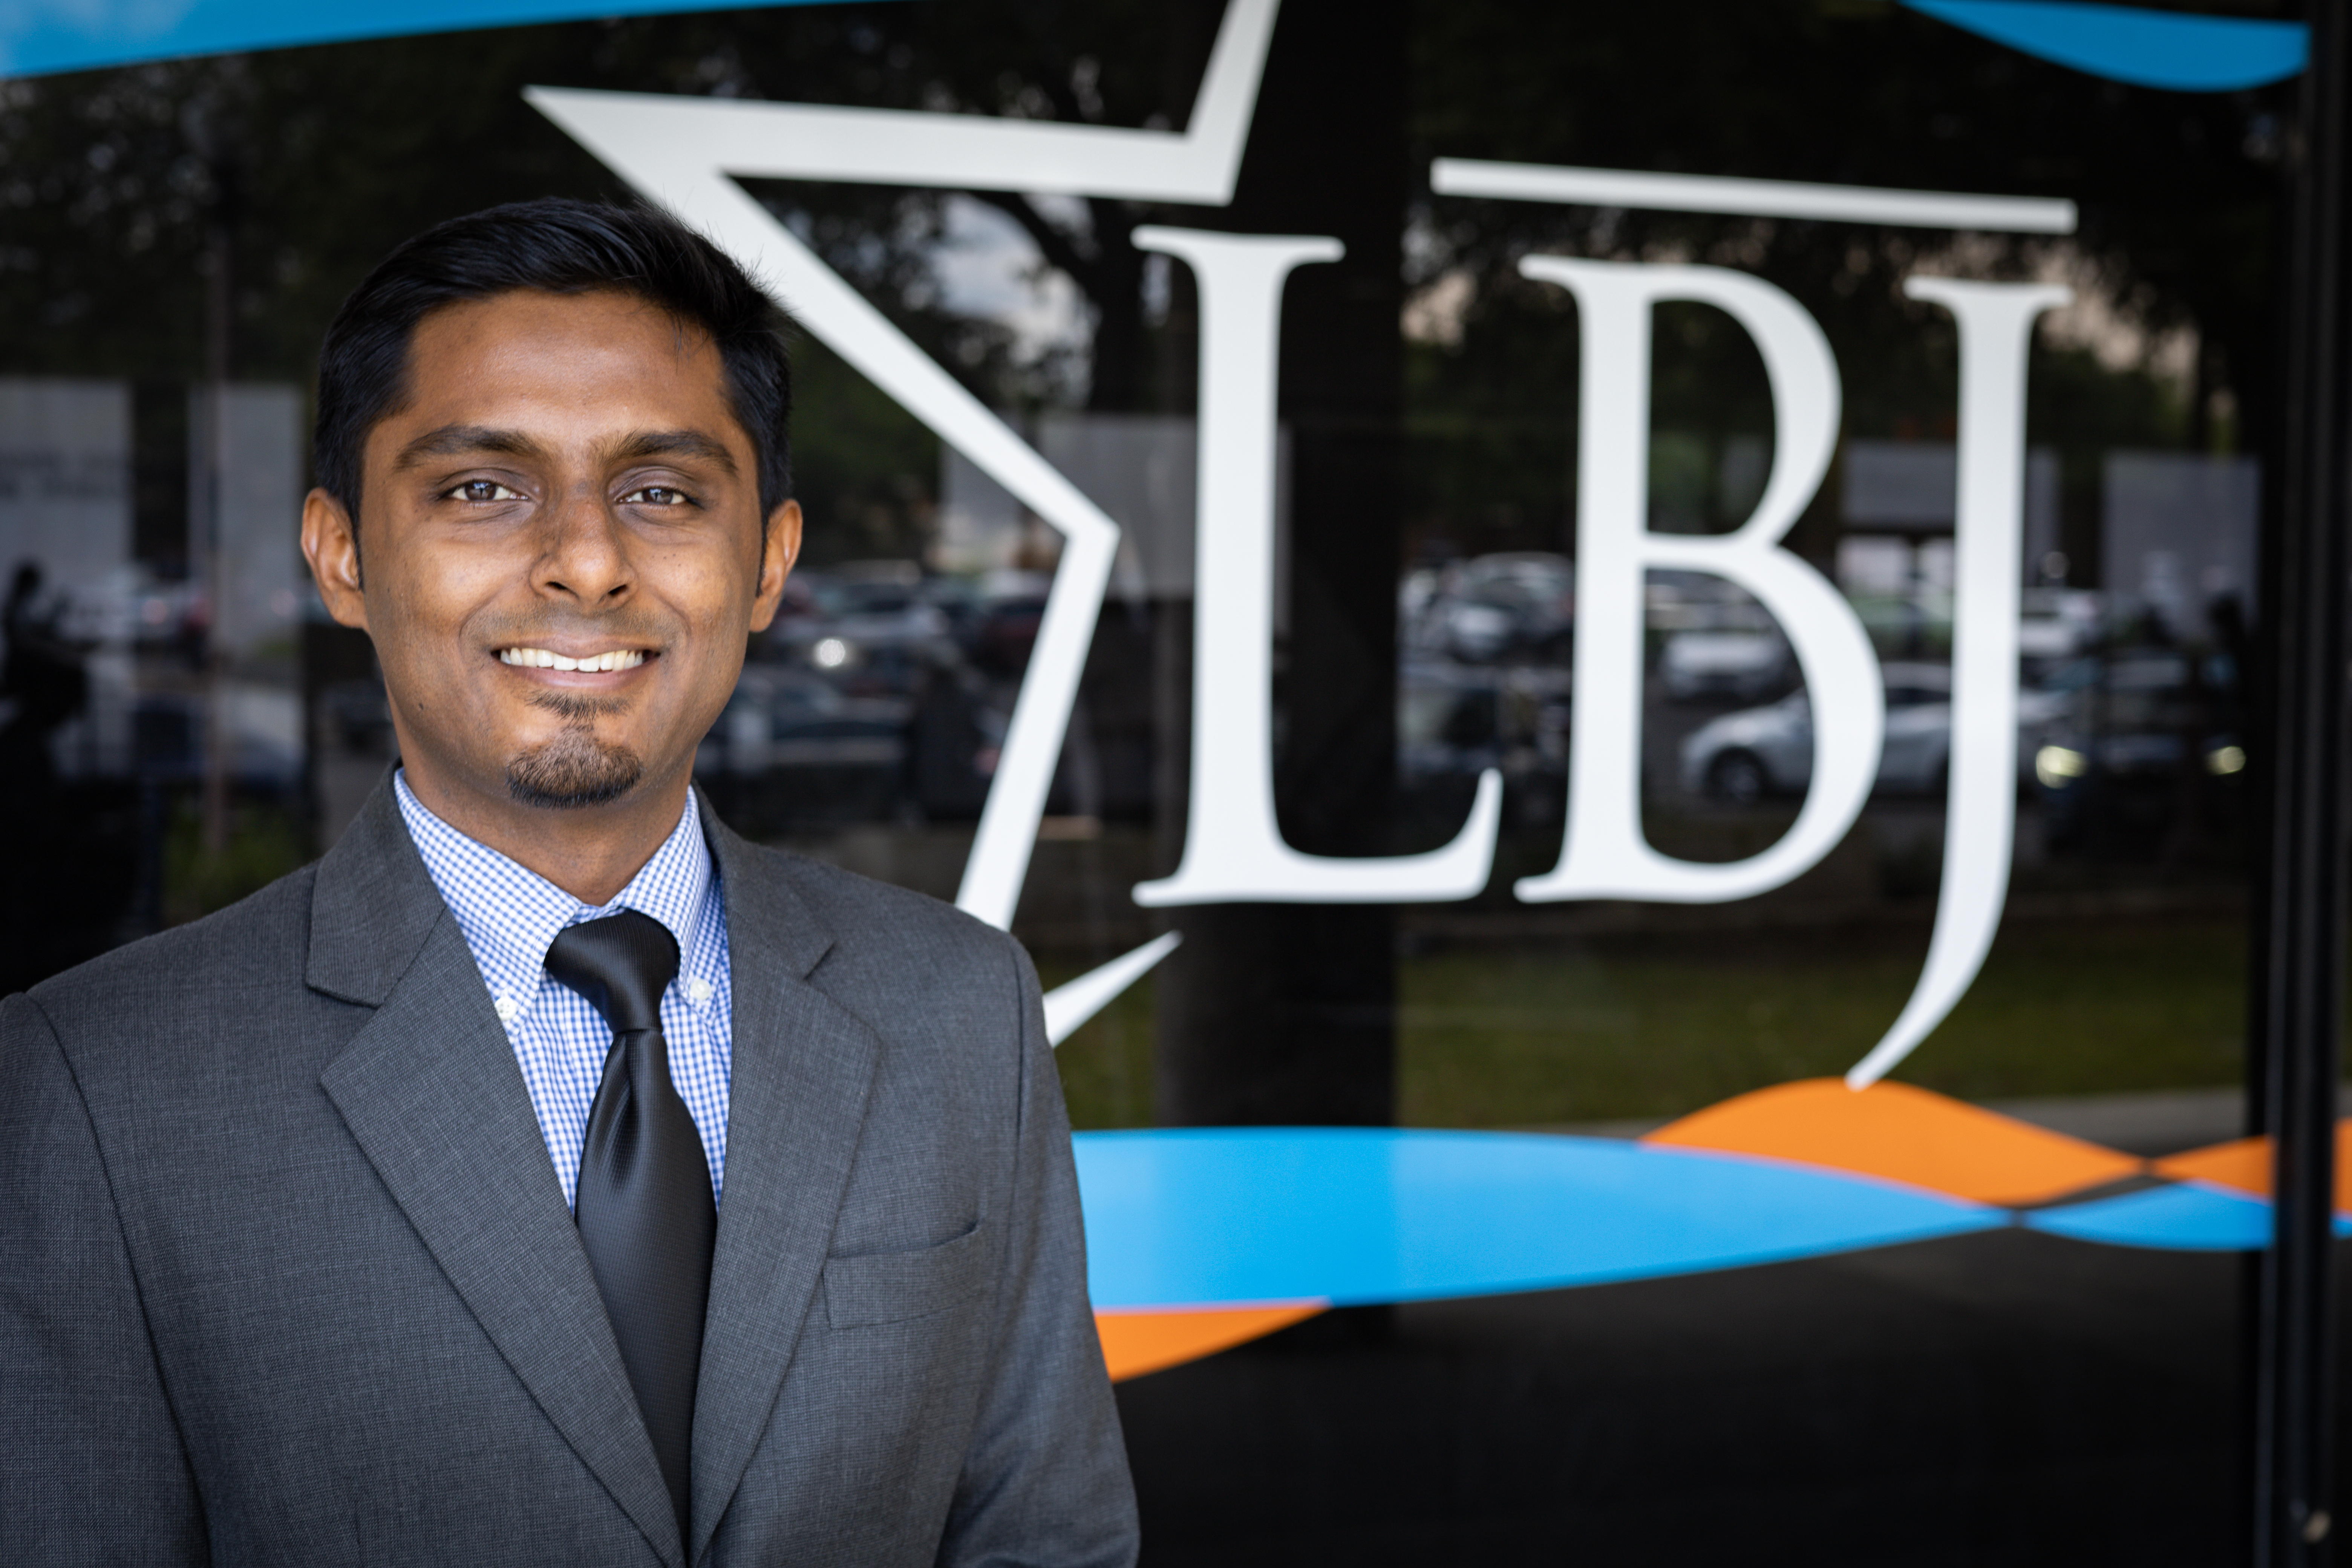 PhD candidate Vivek Shastry posing in front of the LBJ sign.